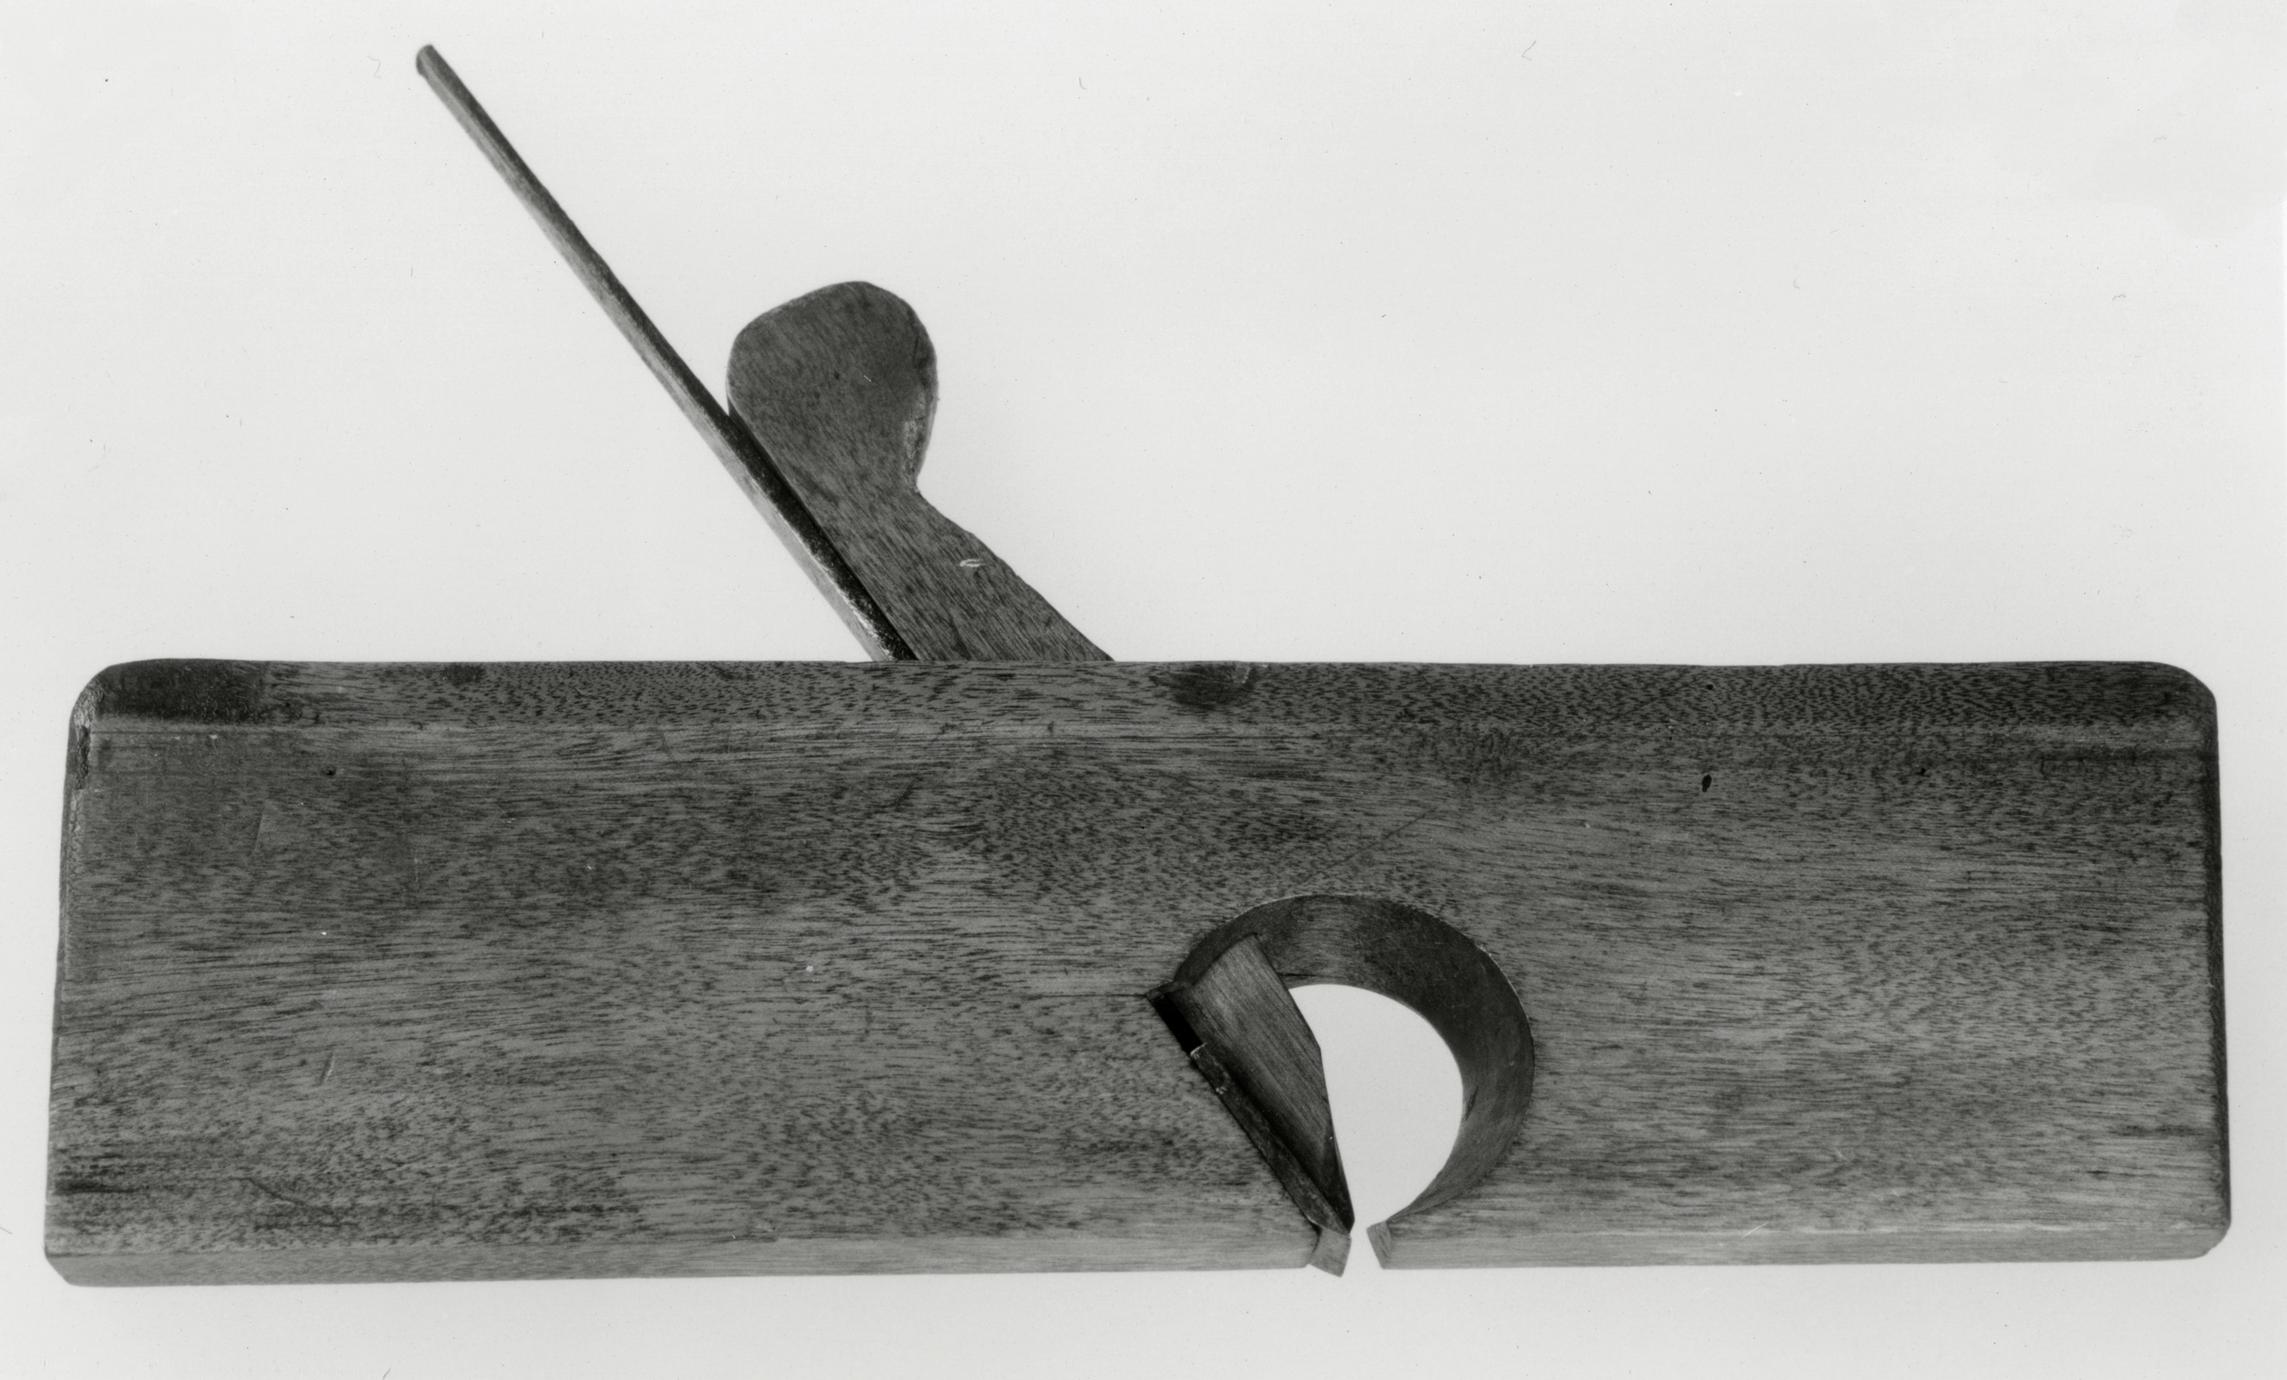 Black and white photograph of a square-mounted rabbet plane.